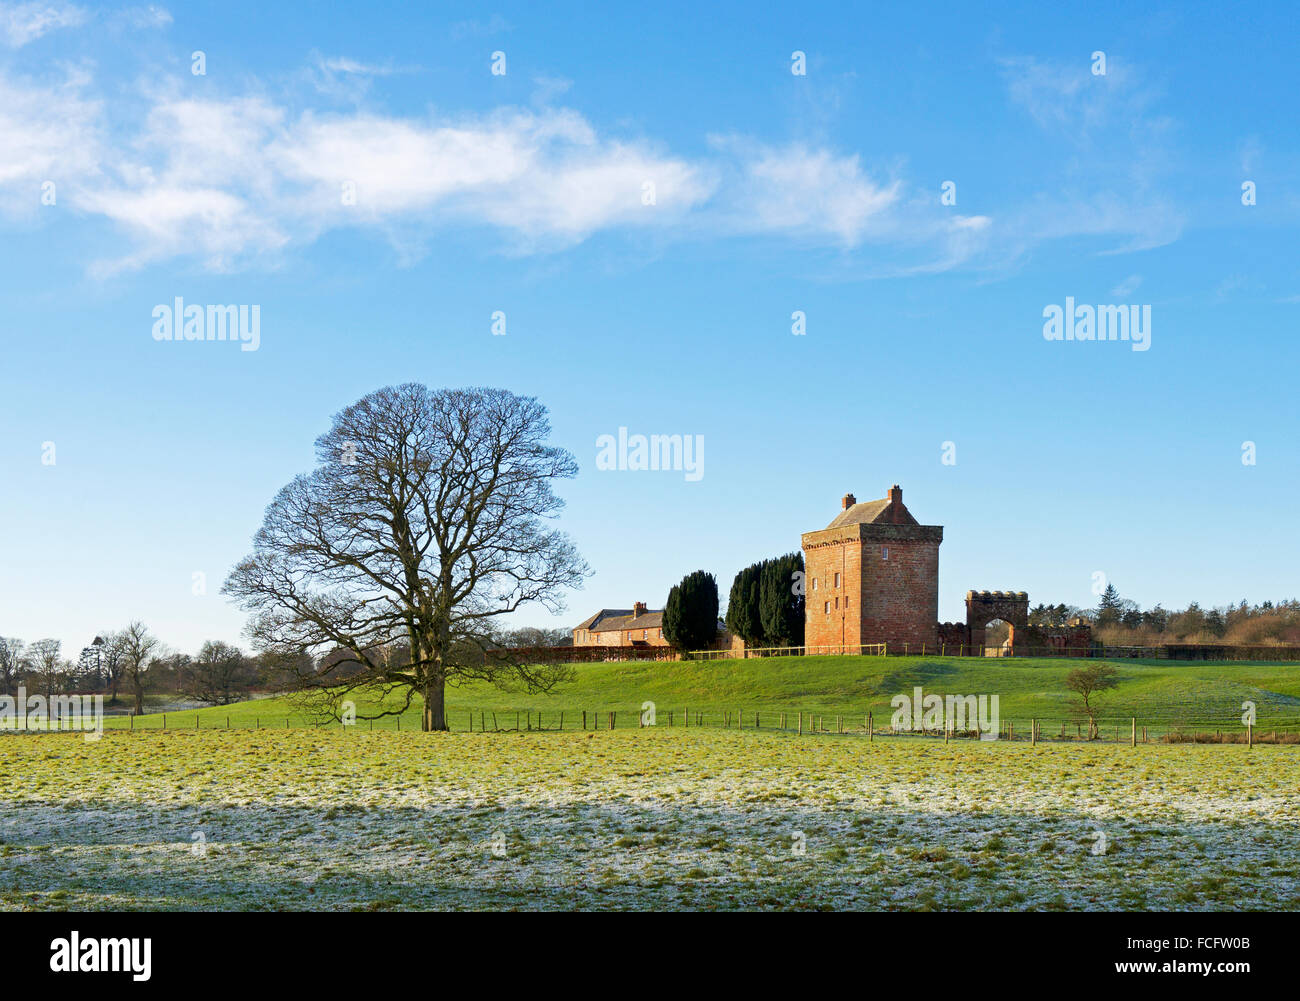 Kirkandrews Tower, a fortified house at Kirkandrews-on-Esk, Cumbria, England UK Stock Photo